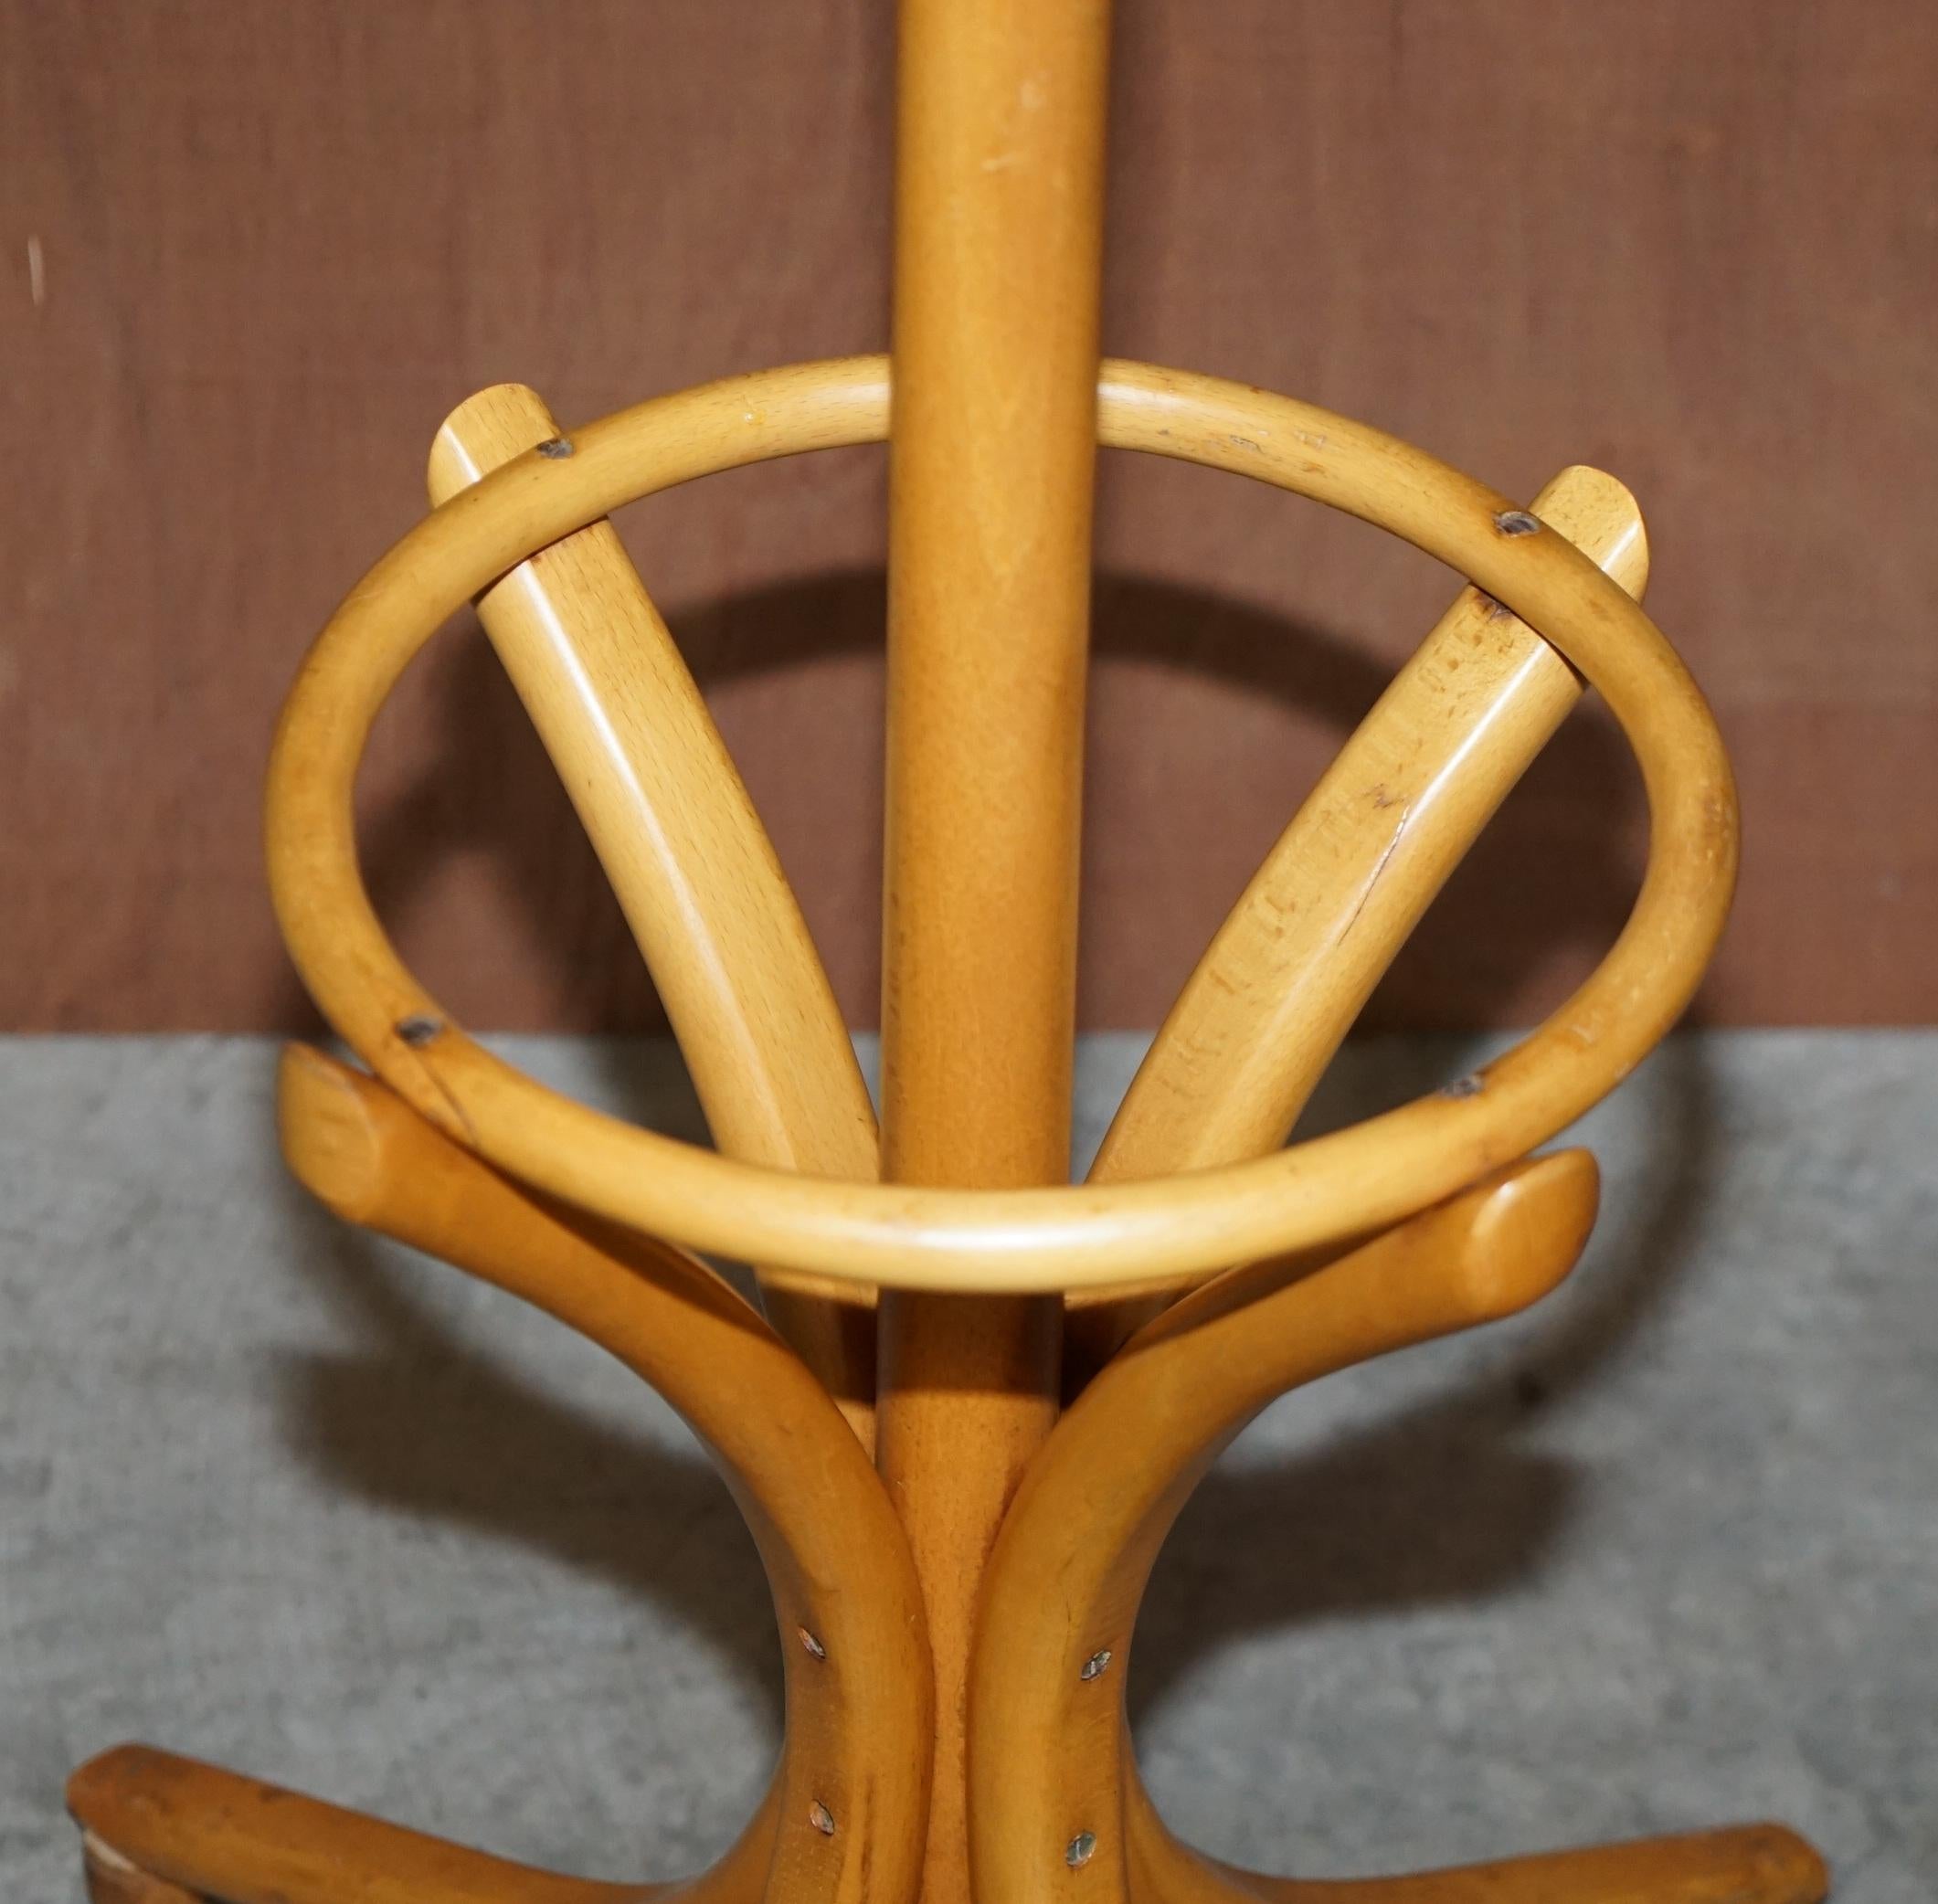 20th Century Lovely Beech Wood Very Tall Thonet Bentwood Coat Hat & Scarf Rack or Stand